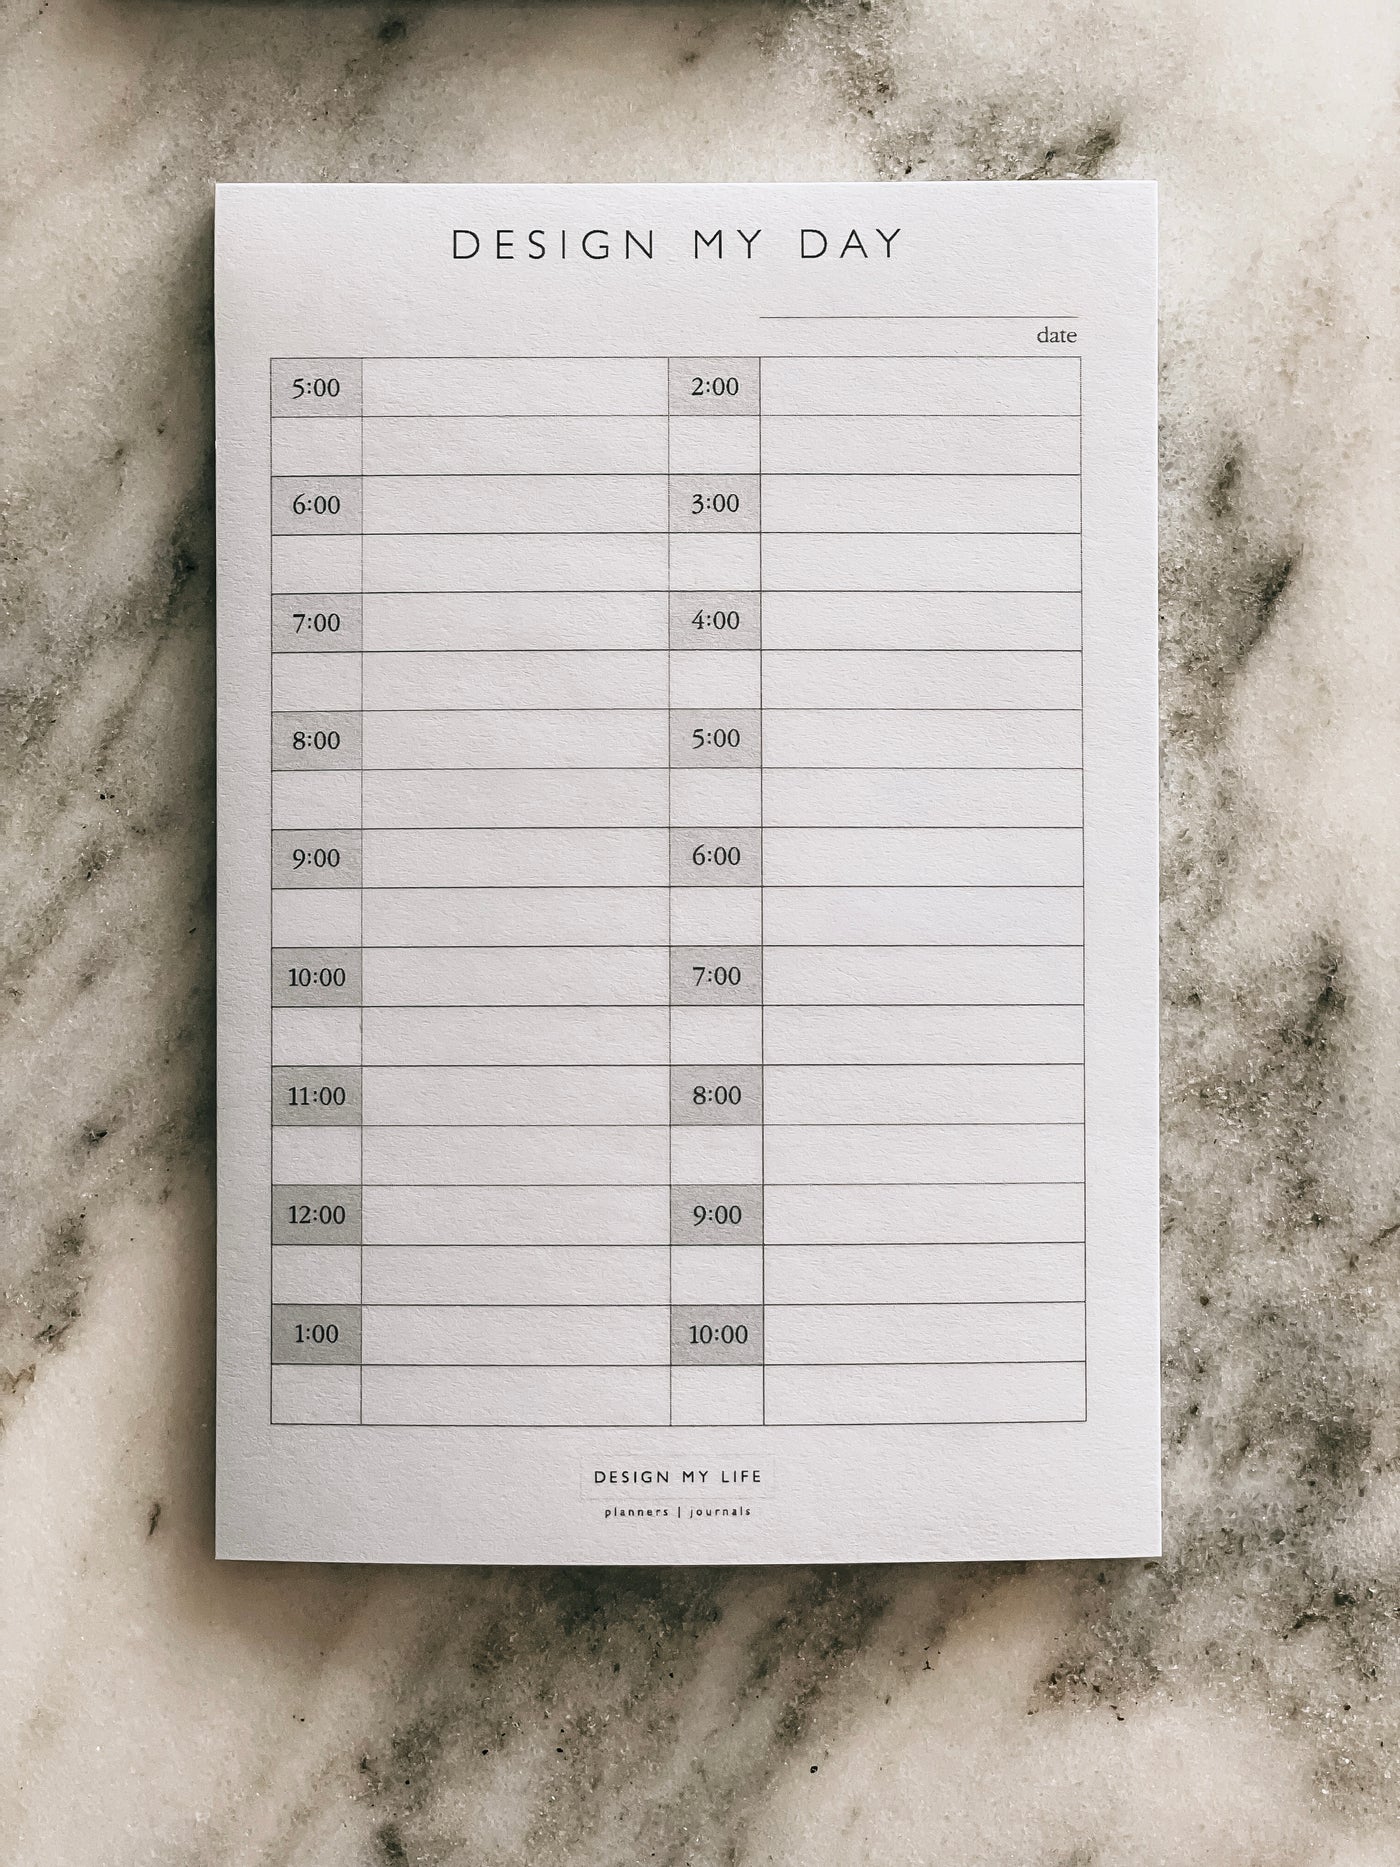 Design My Day Post-It Notes